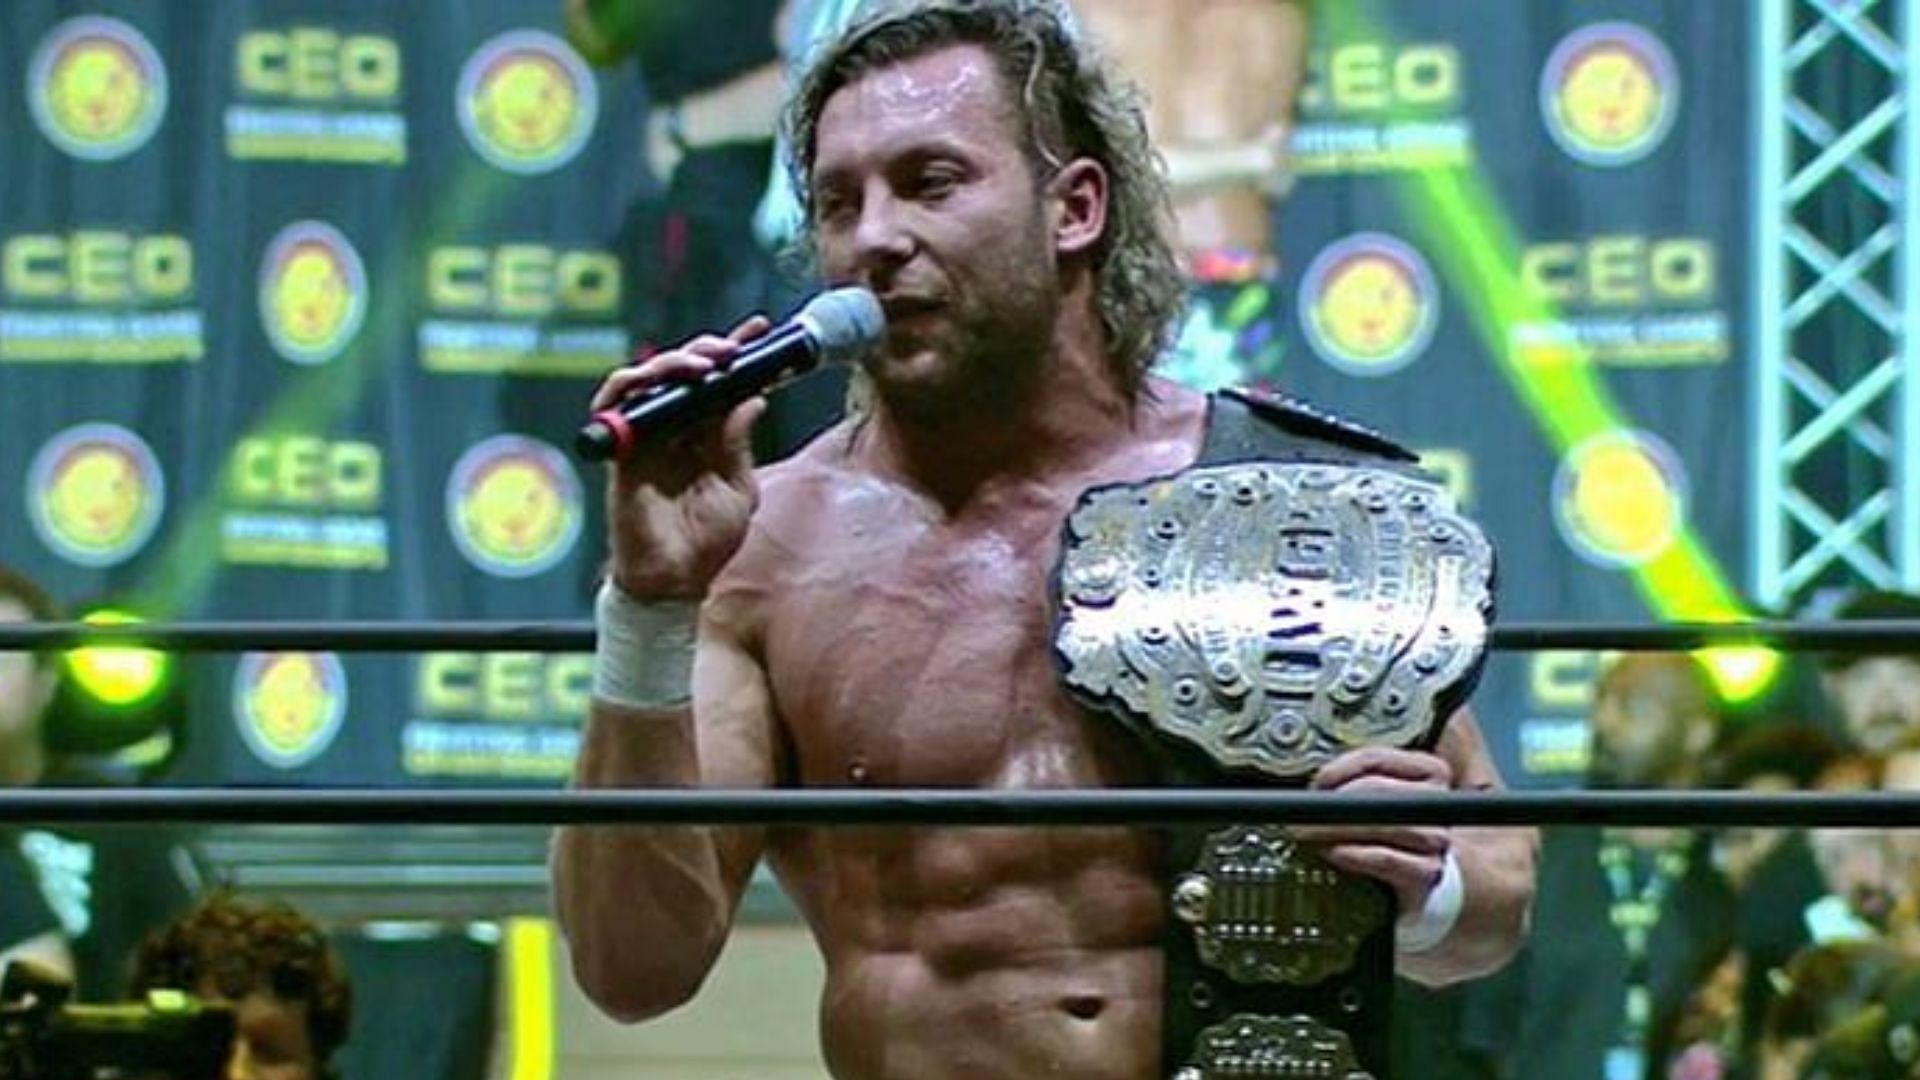 Kenny Omega is a former IWGP Heavyweight champion on one occasion